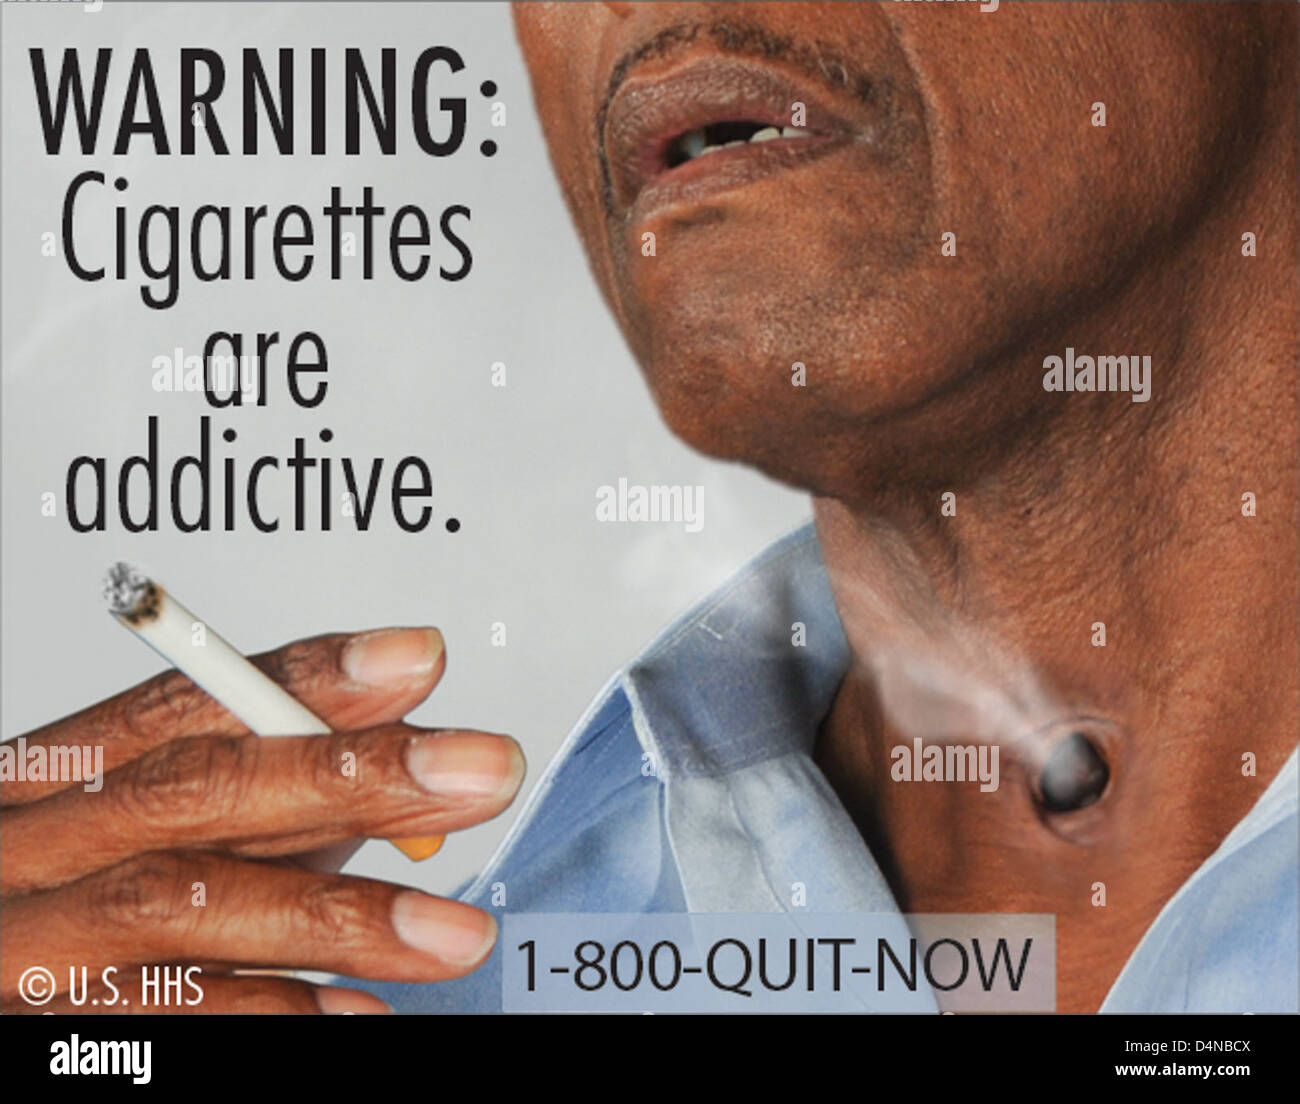 Cigarette Health Warning Images Stock Photo